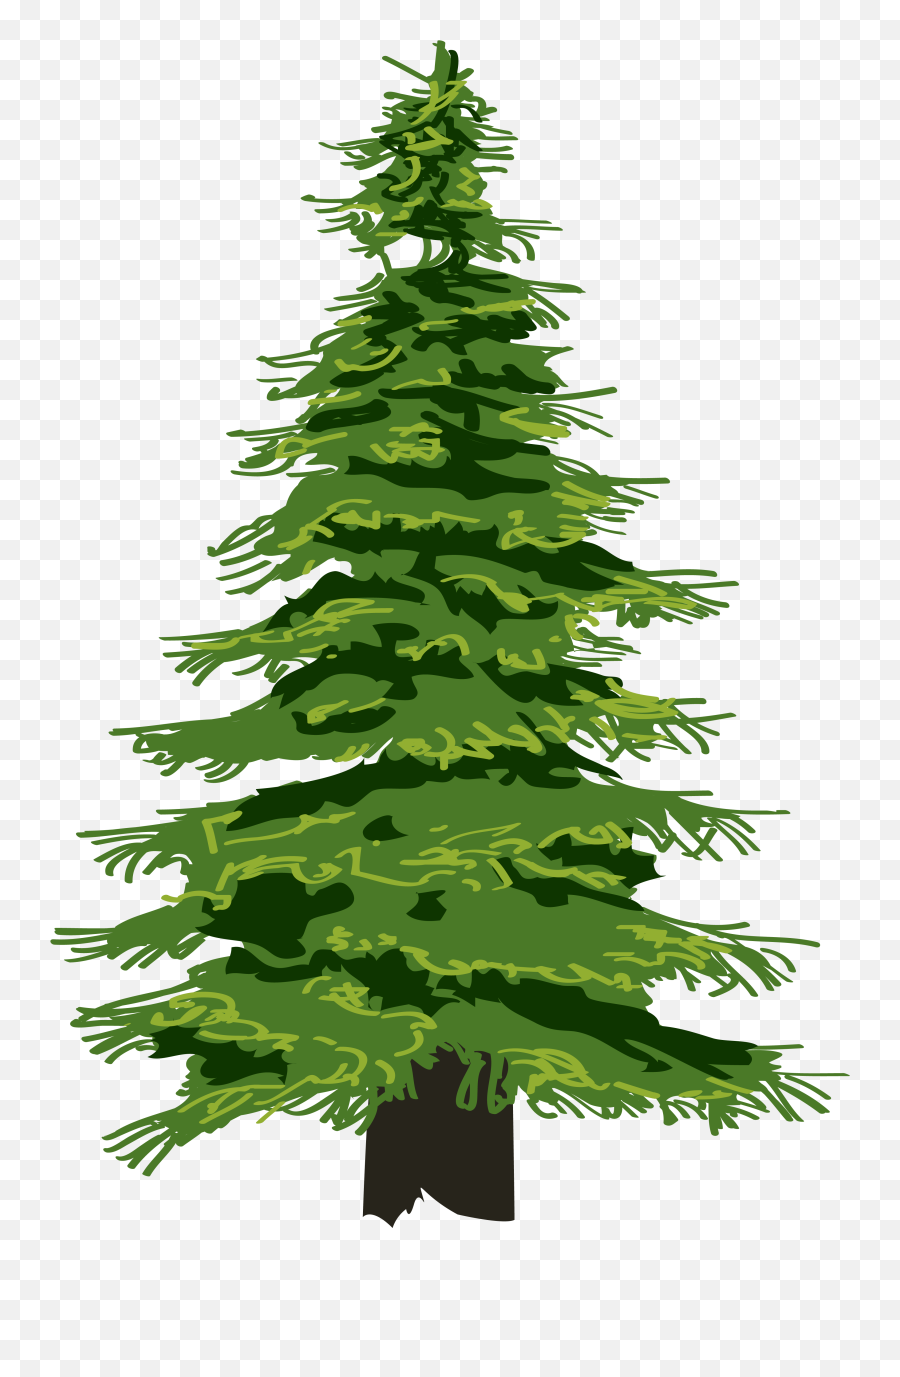 Pine Tree Clipart Christmas Tree Png - Transparent Pine Tree Clipart Emoji,Evergreen Tree Emoji